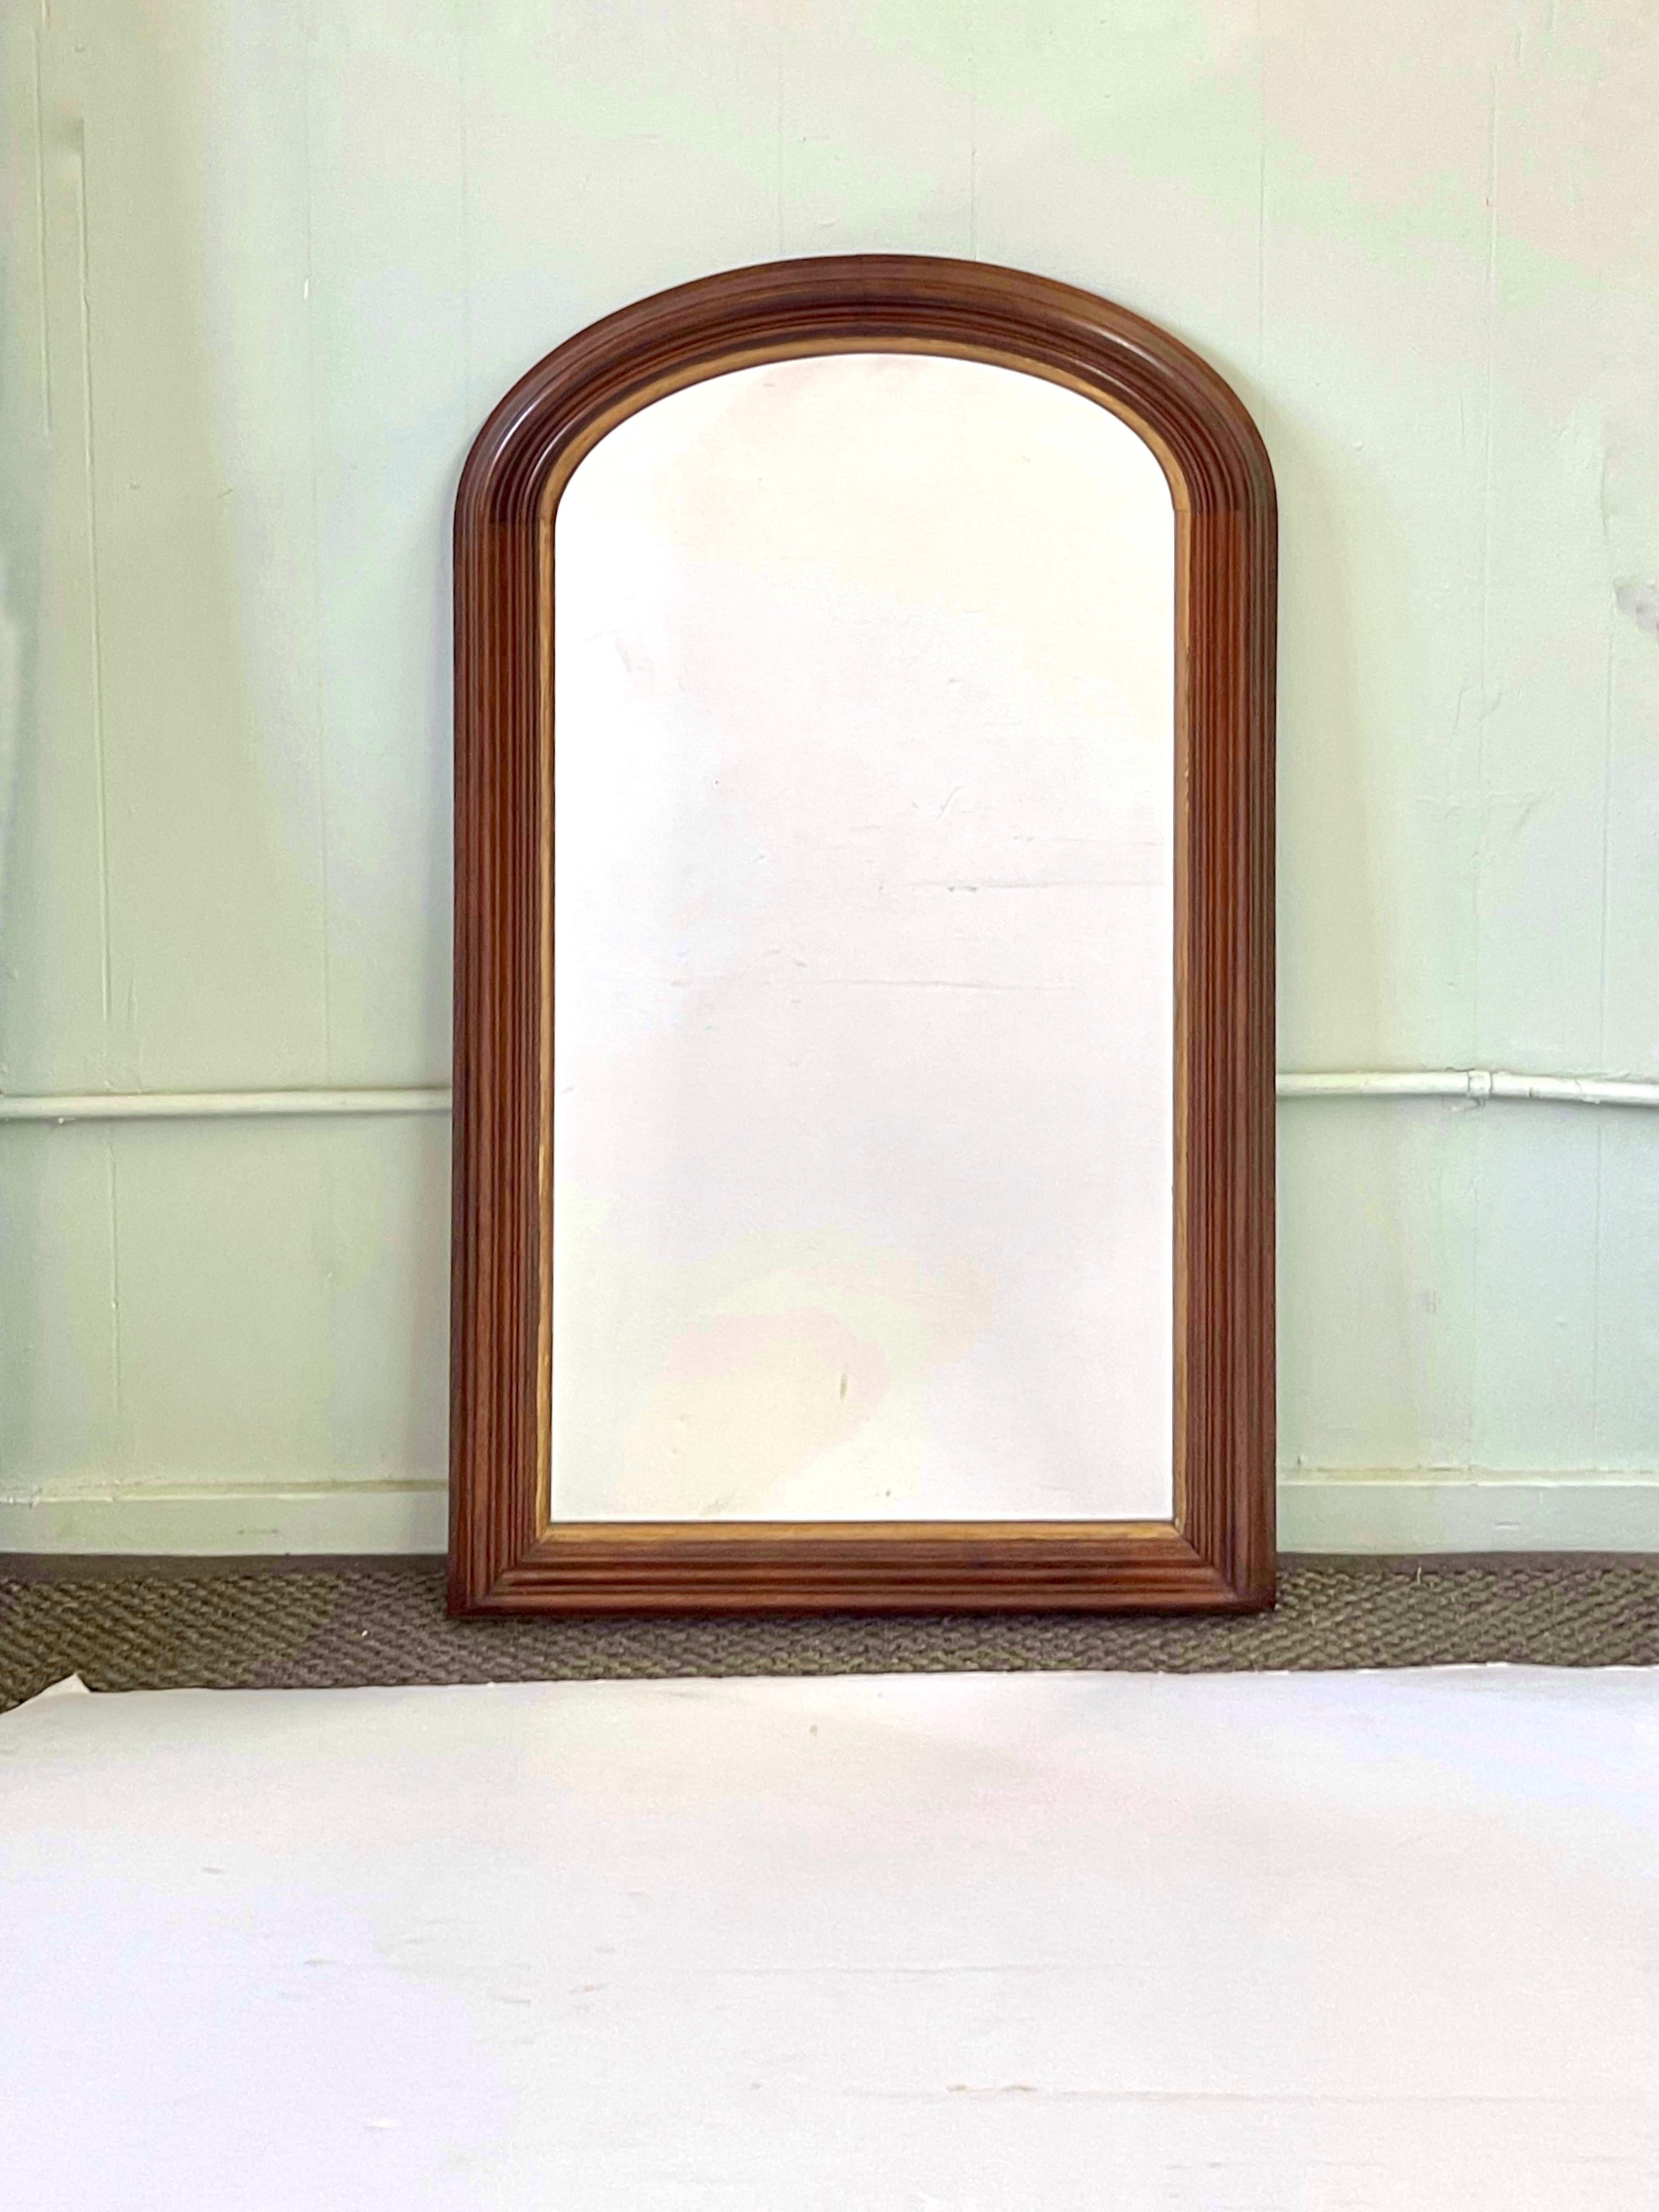 19th Century, French Louis Philippe wall mirror with beveled mahogany frame and accented with an interior giltwood trim. Mirror glass is original and is in great antique condition showing very delicate signs of wear and interior spots related to